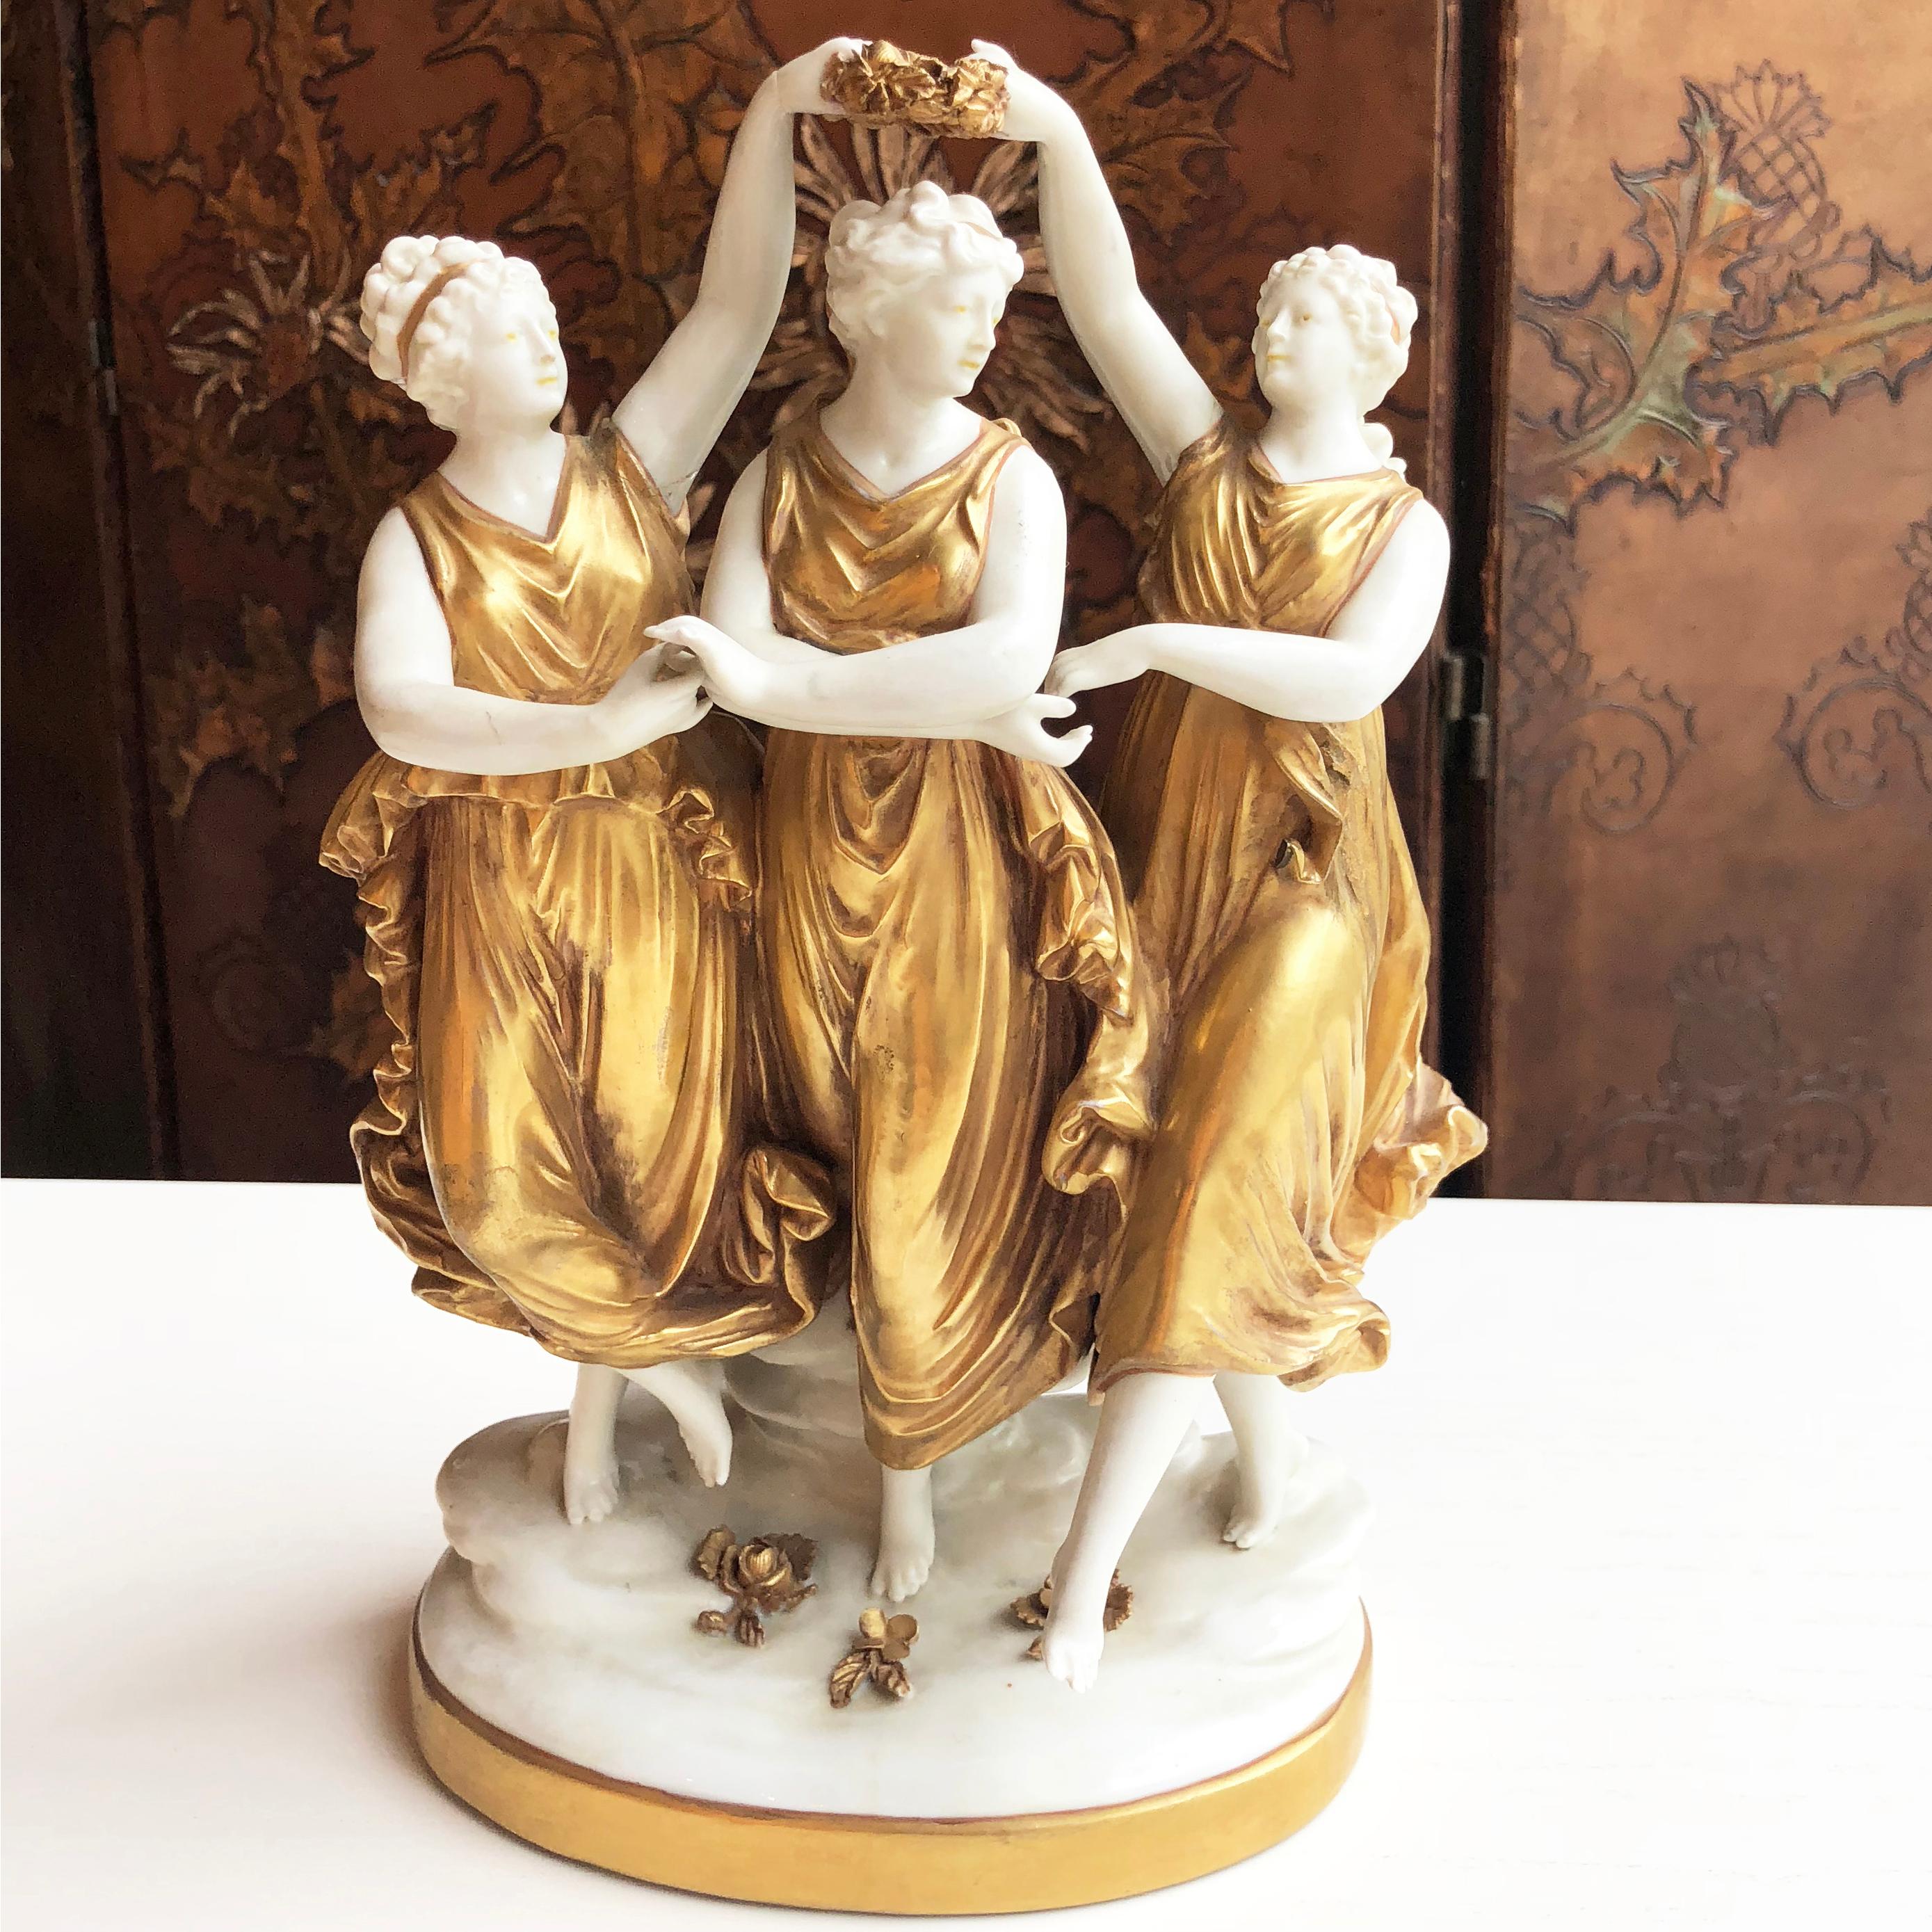 Late 1800’s Italian porcelain sculpture of dancing ladies with gold leaf detailing. Comes with the original antique glass dome.

Sculpture: 18W x 10D x 25H cm
Antique glass dome: 32Dia x 58H cm

Good antique condition